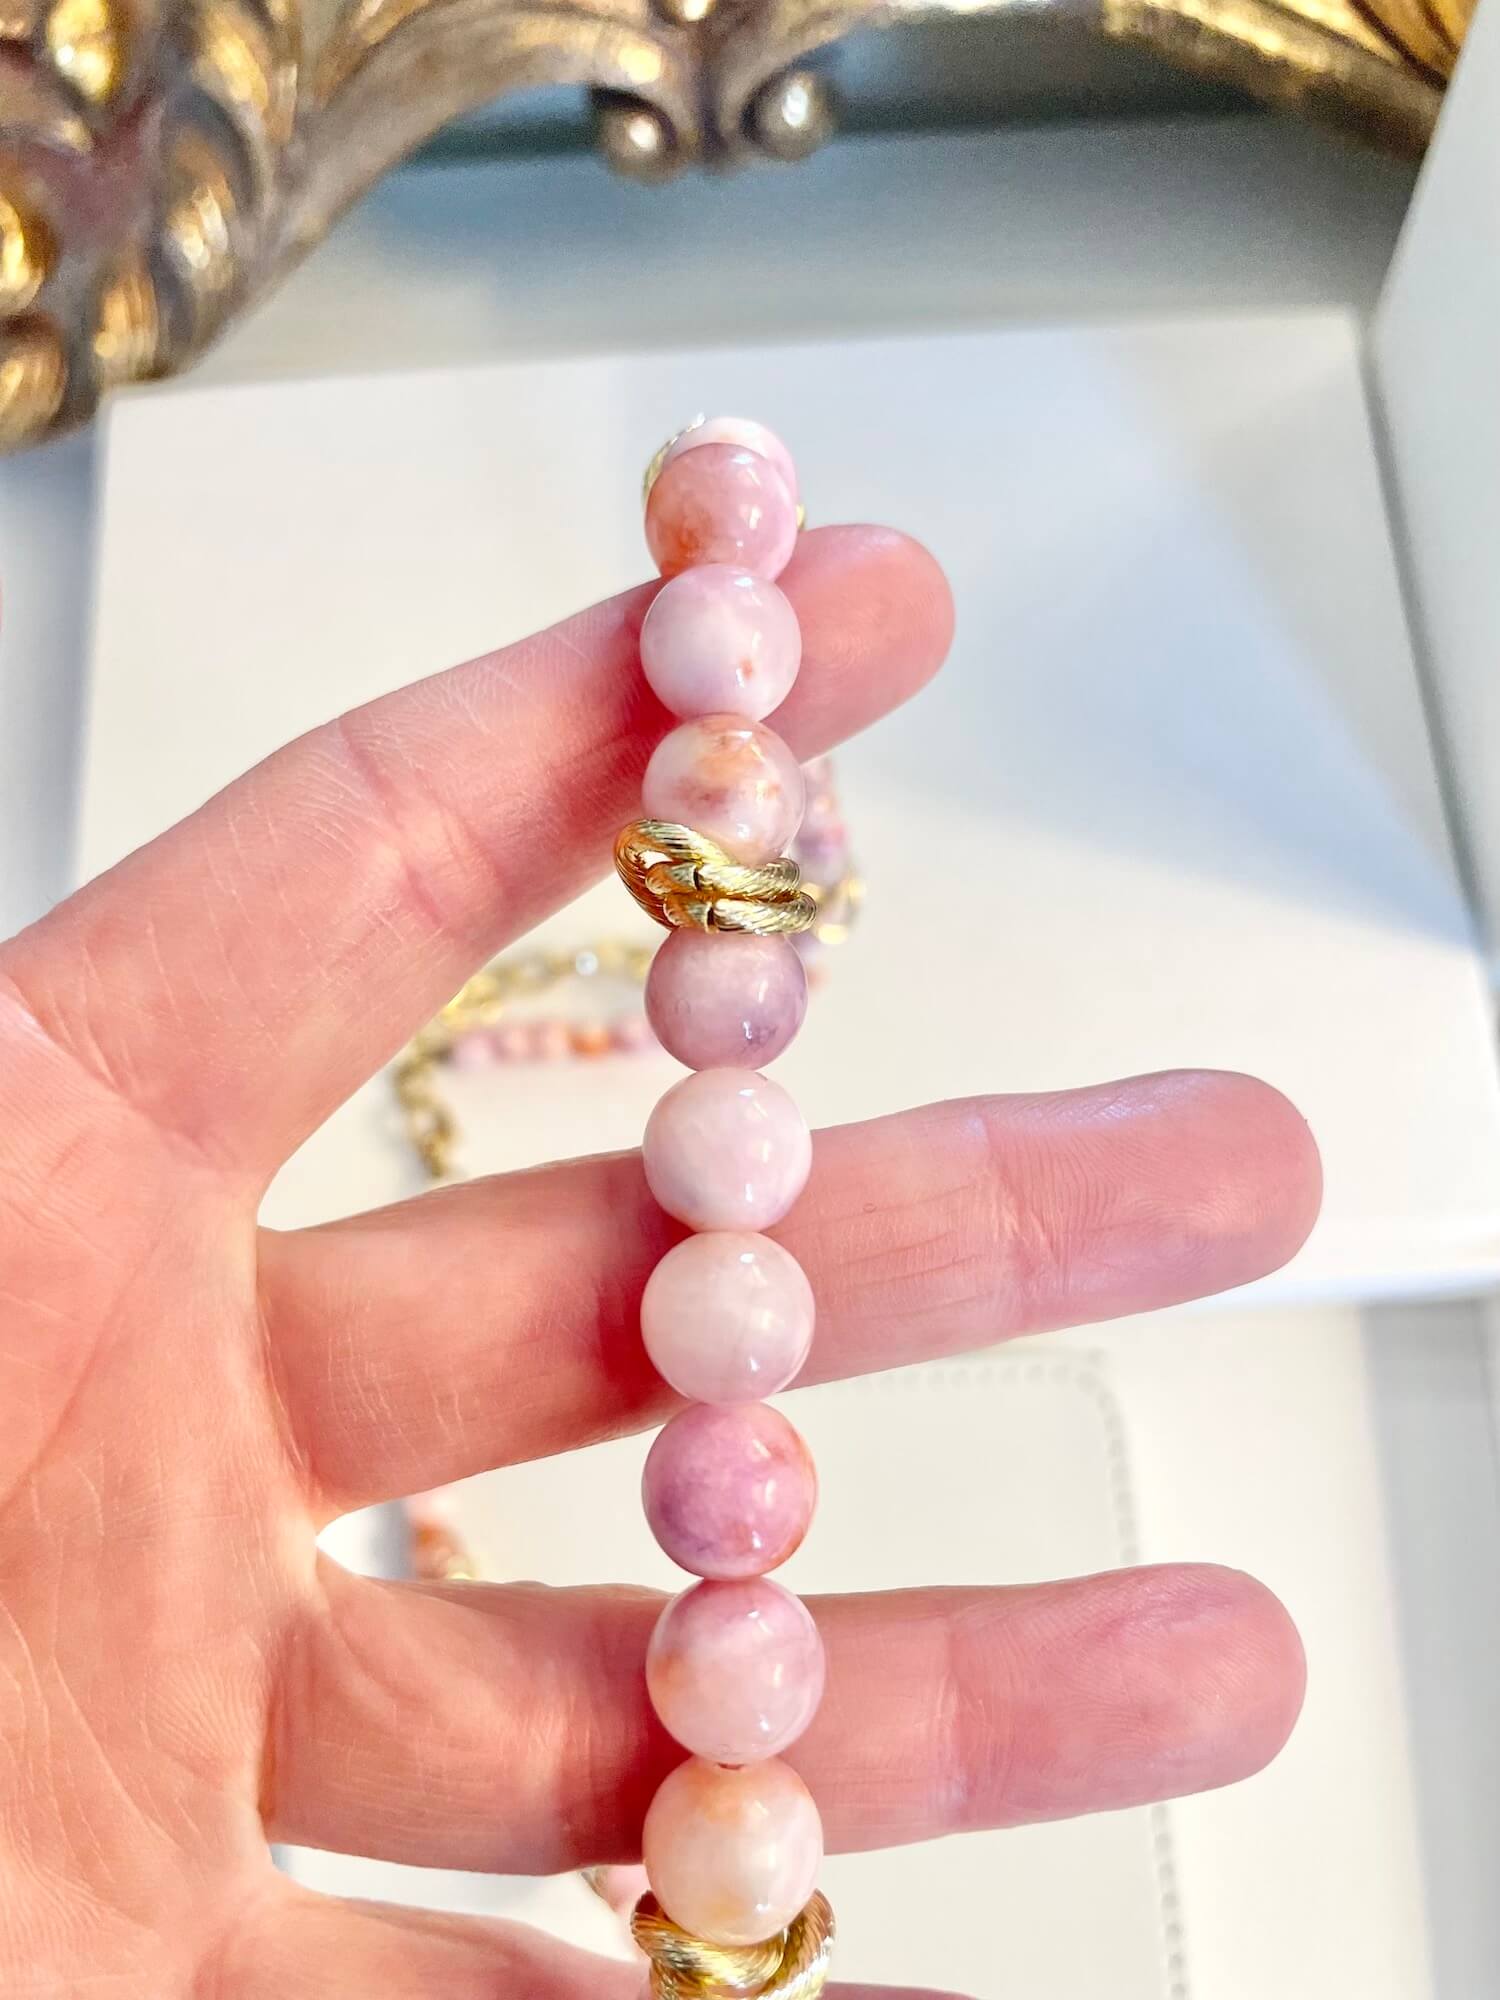 Vintage 1970's soft pink glass beaded necklace, with a dusting of gold.... so timeless